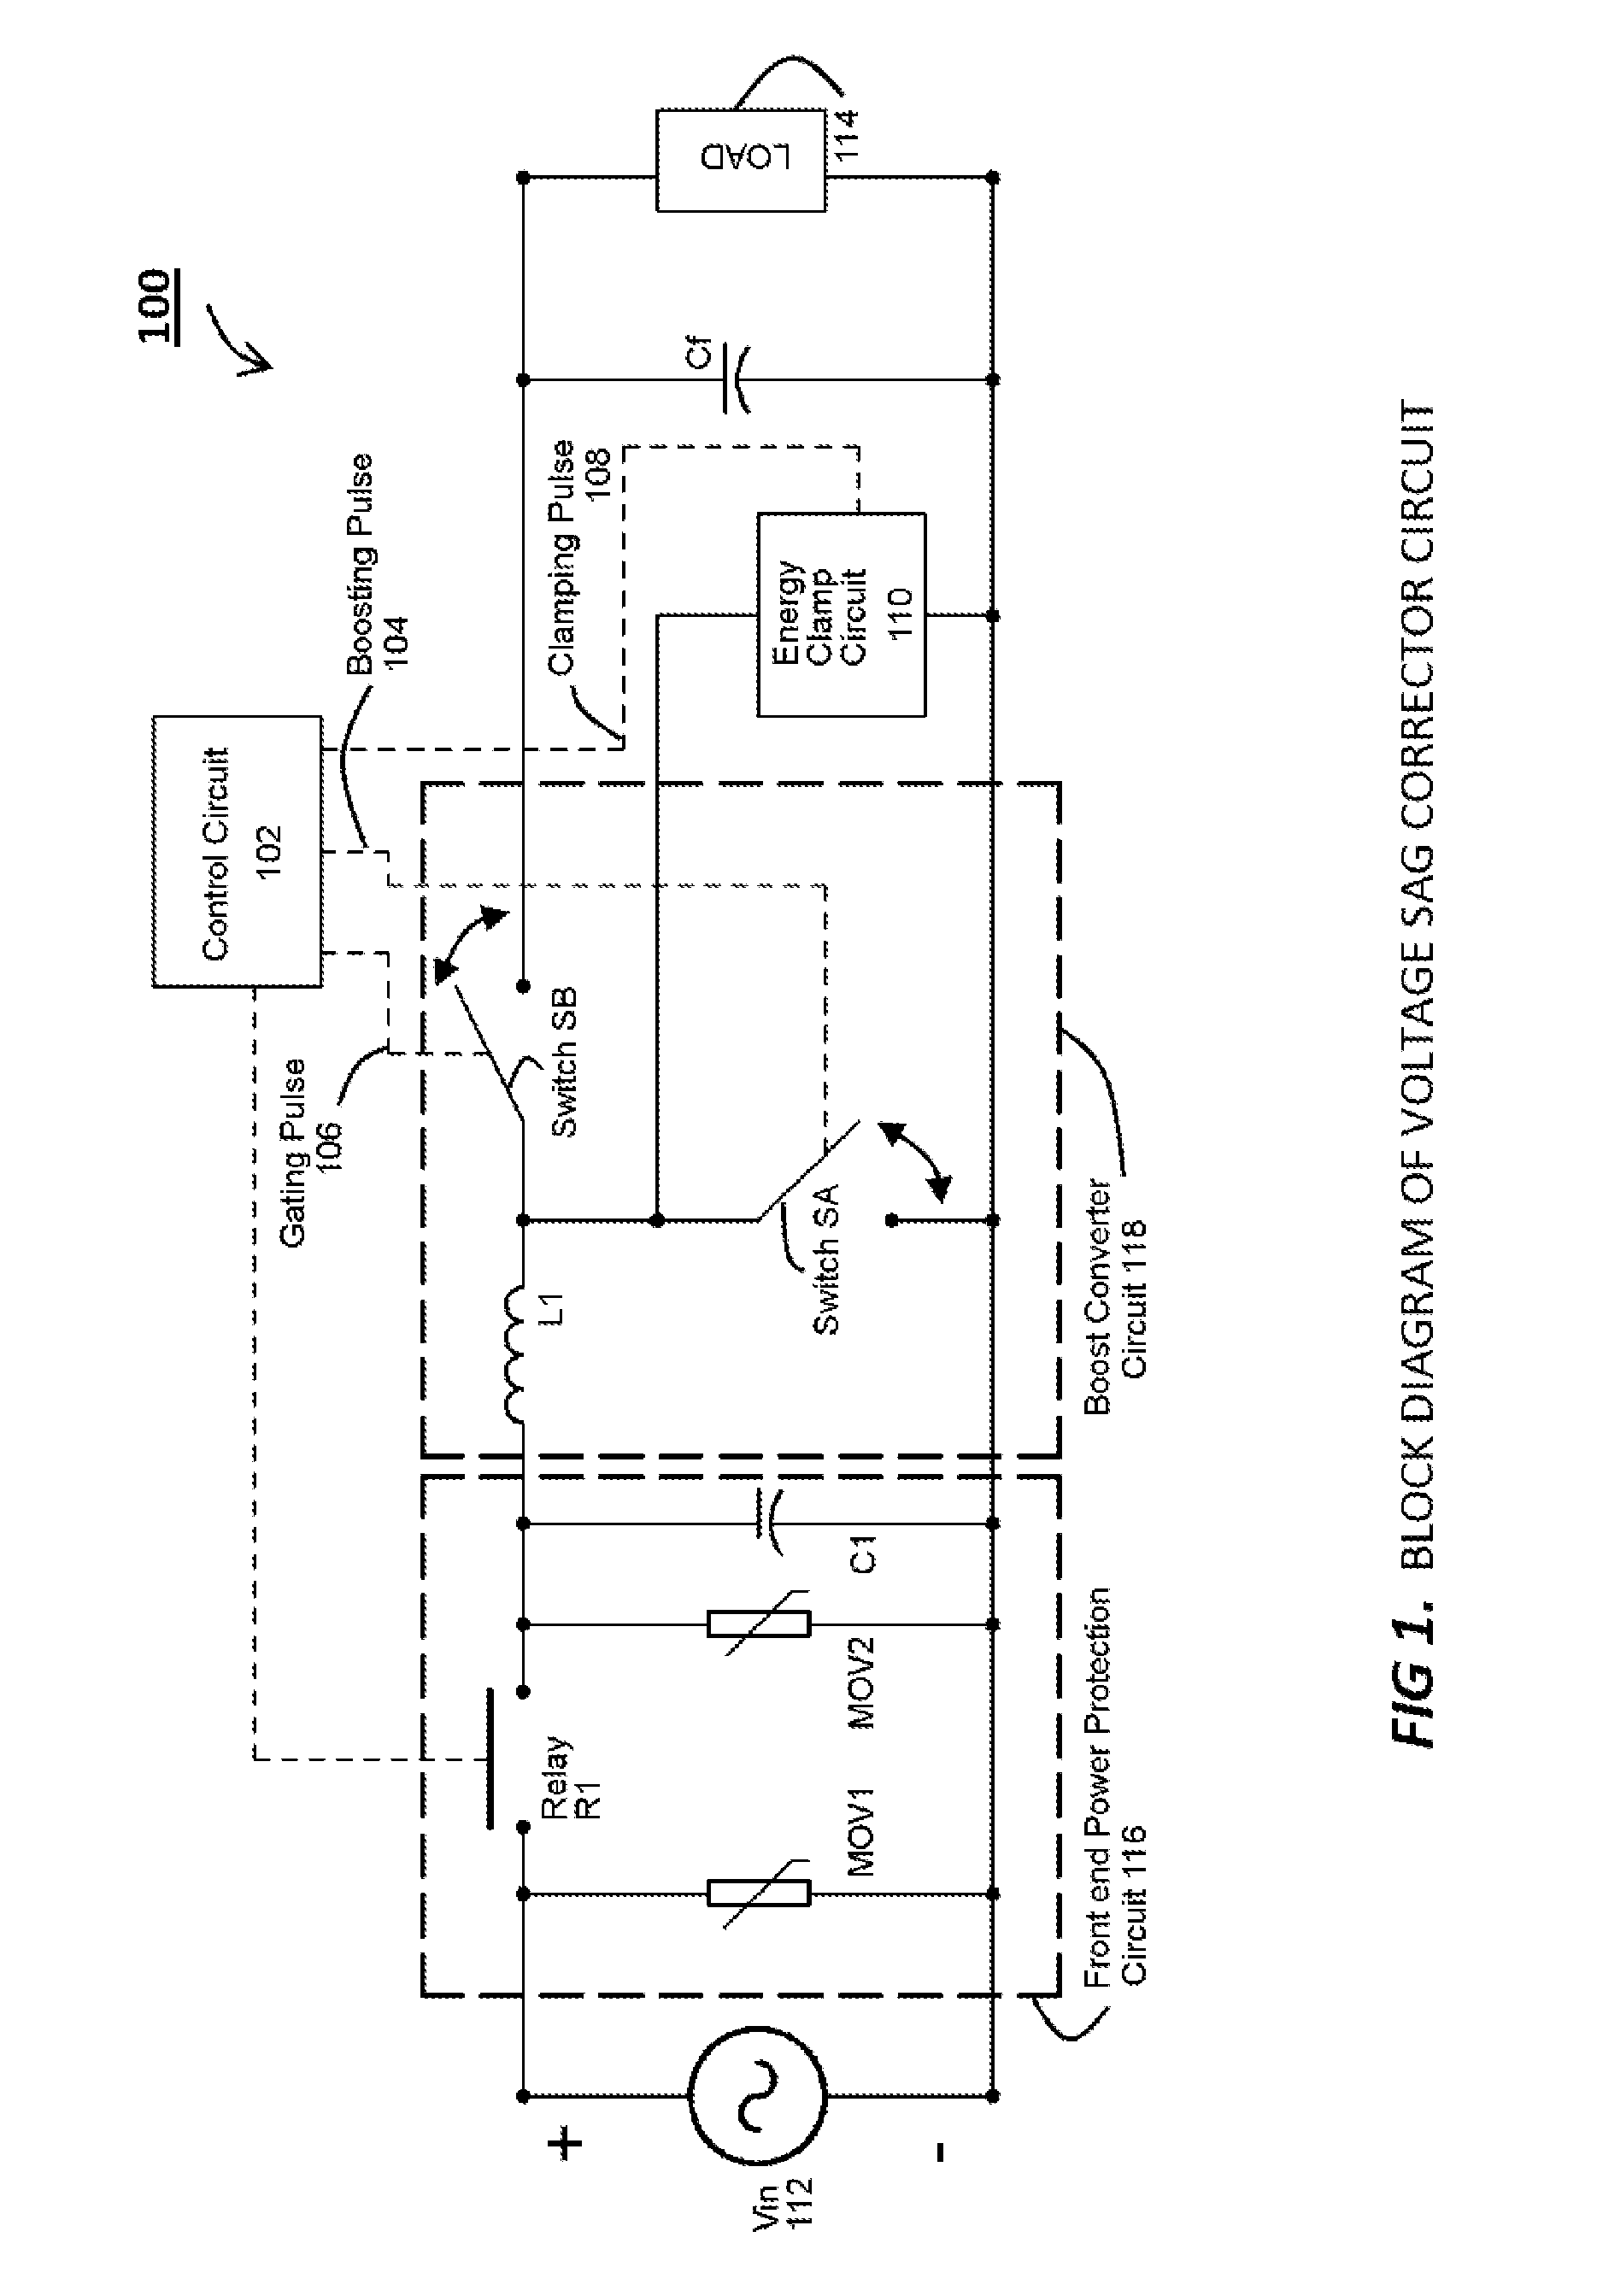 Voltage Sag Corrector Using a Variable Duty Cycle Boost Converter